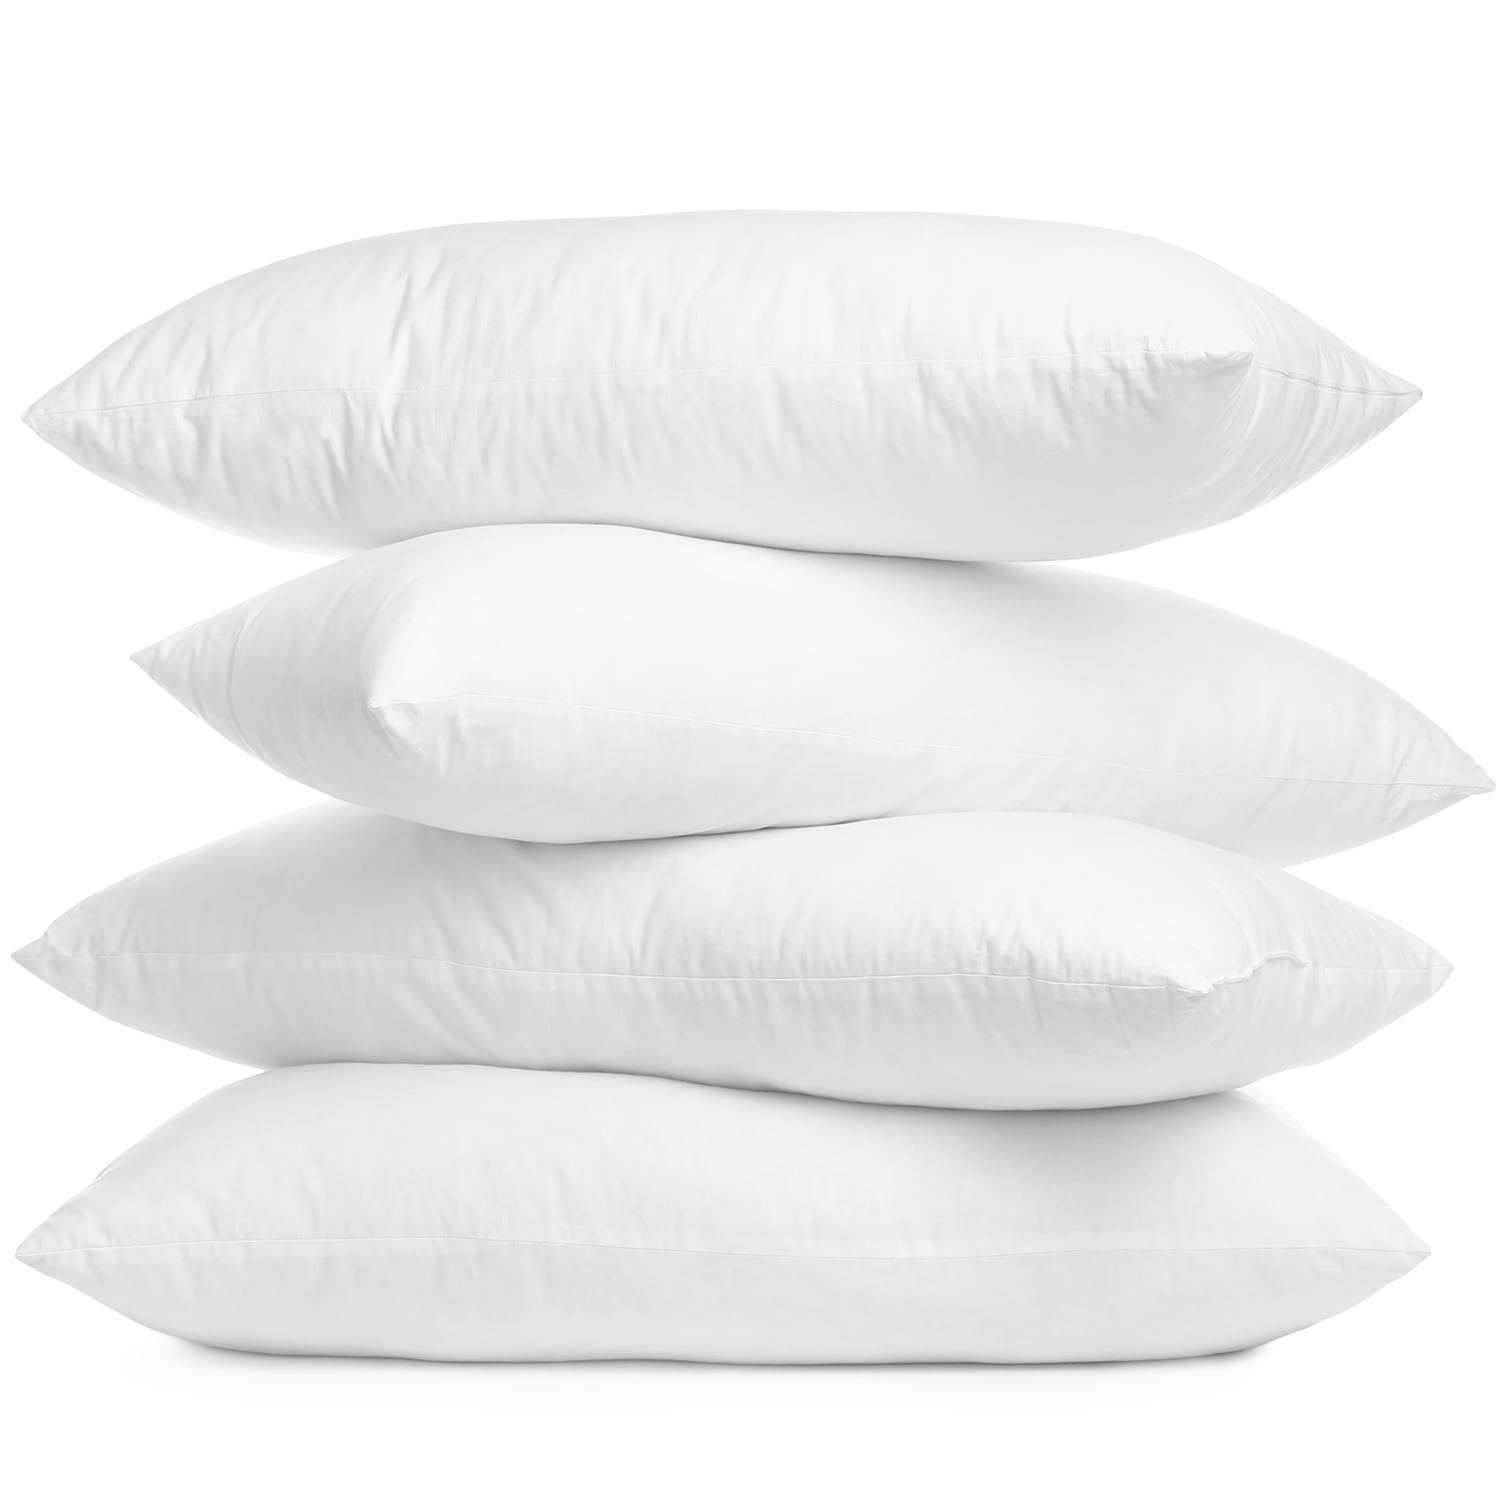 Foamily Throw Pillows Insert - (Pack of 4) Pillow 18 x 18 Inches for Bed  and Couch - 100% Machine Washable Cotton Indoor Decorative Throw Pillows